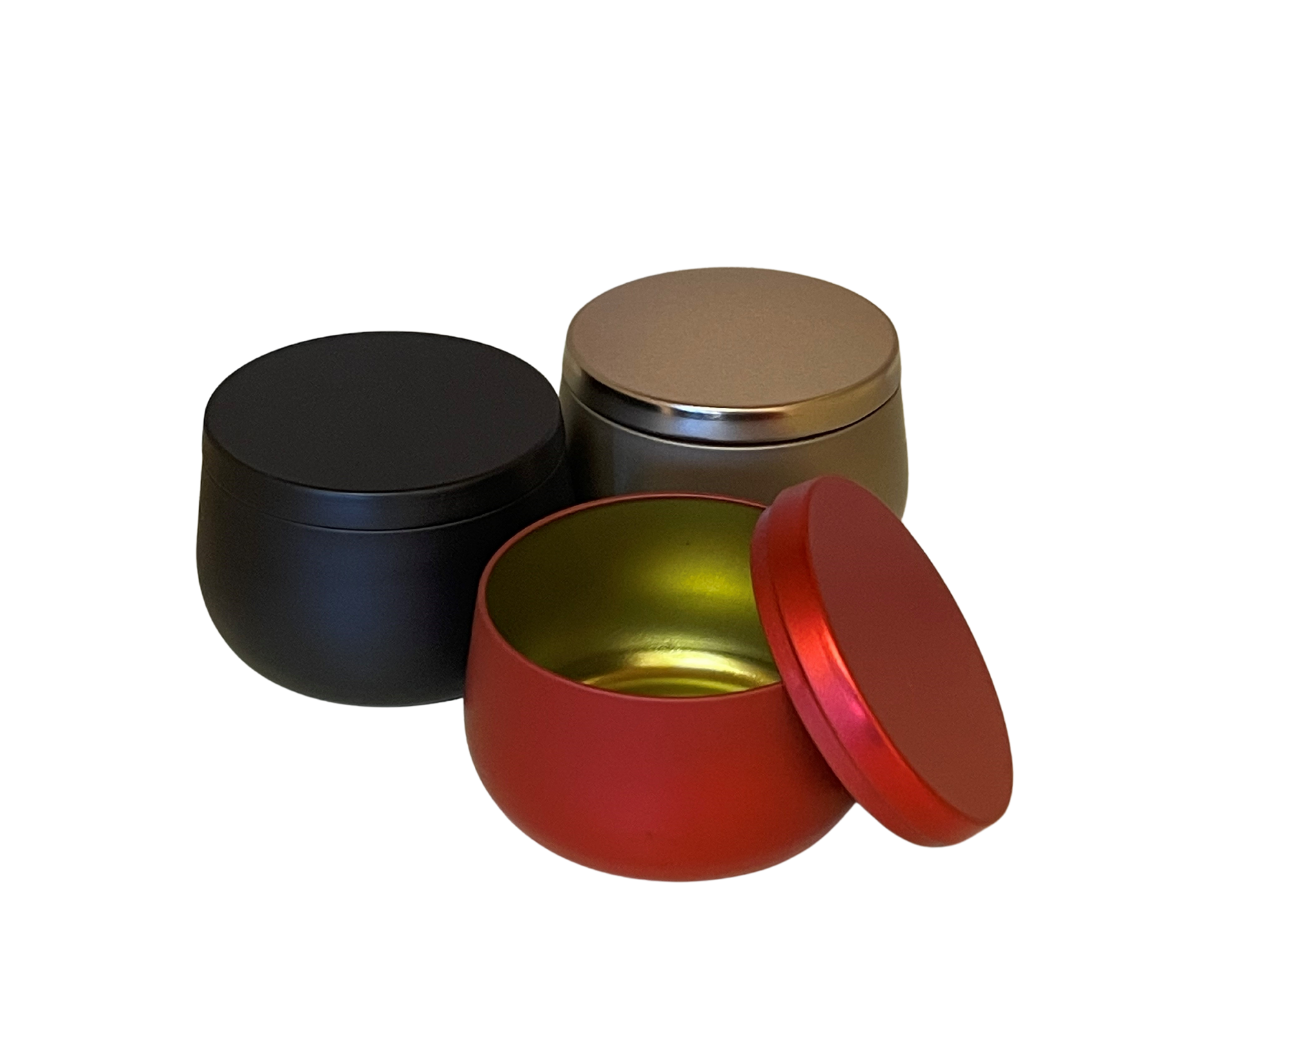 Copper Gold Candle Tin Seamless – Pro Candle Supply